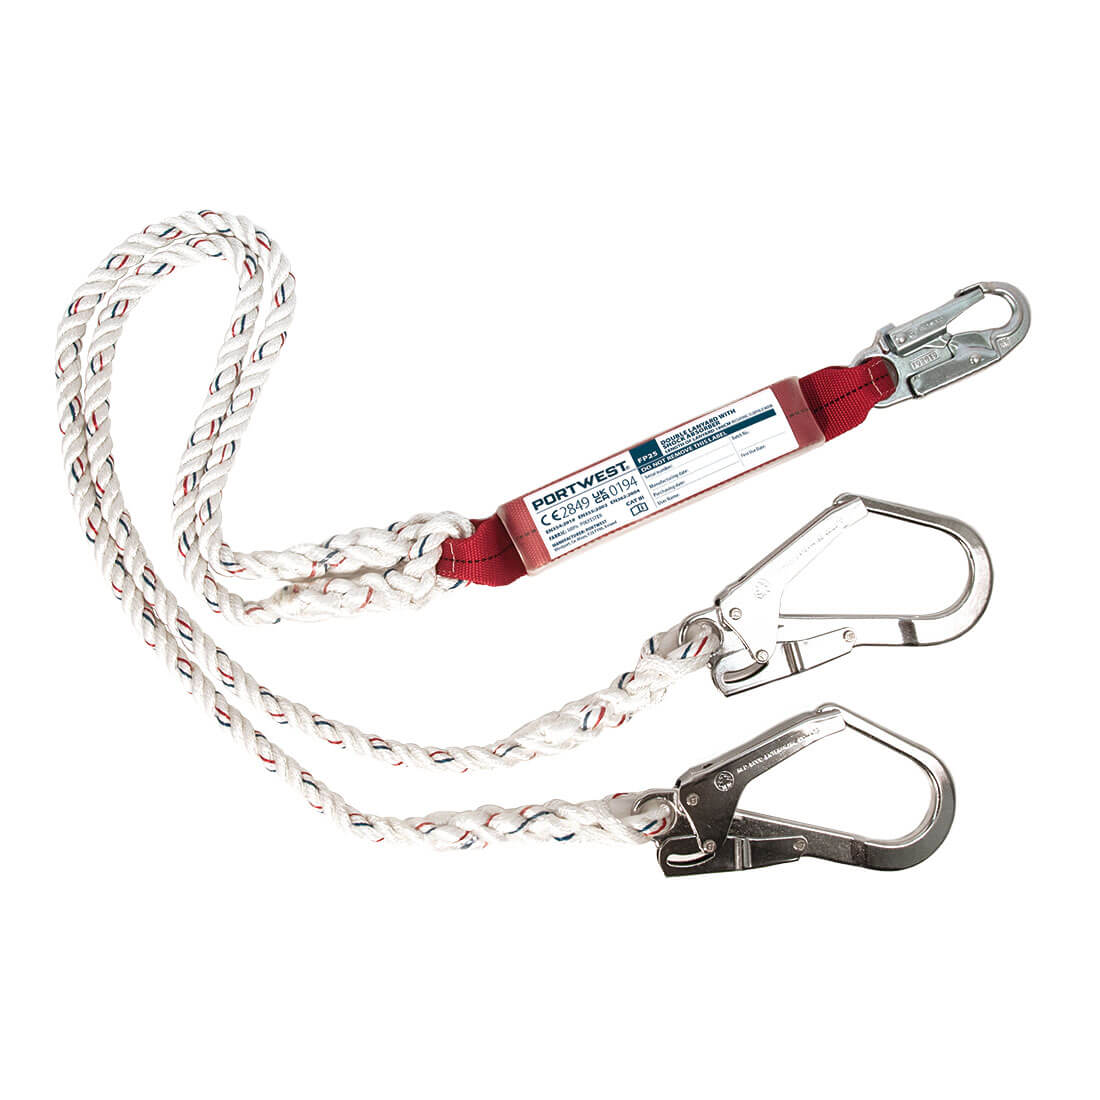 Double 1.8m Lanyard With Shock Absorber  (FP25)